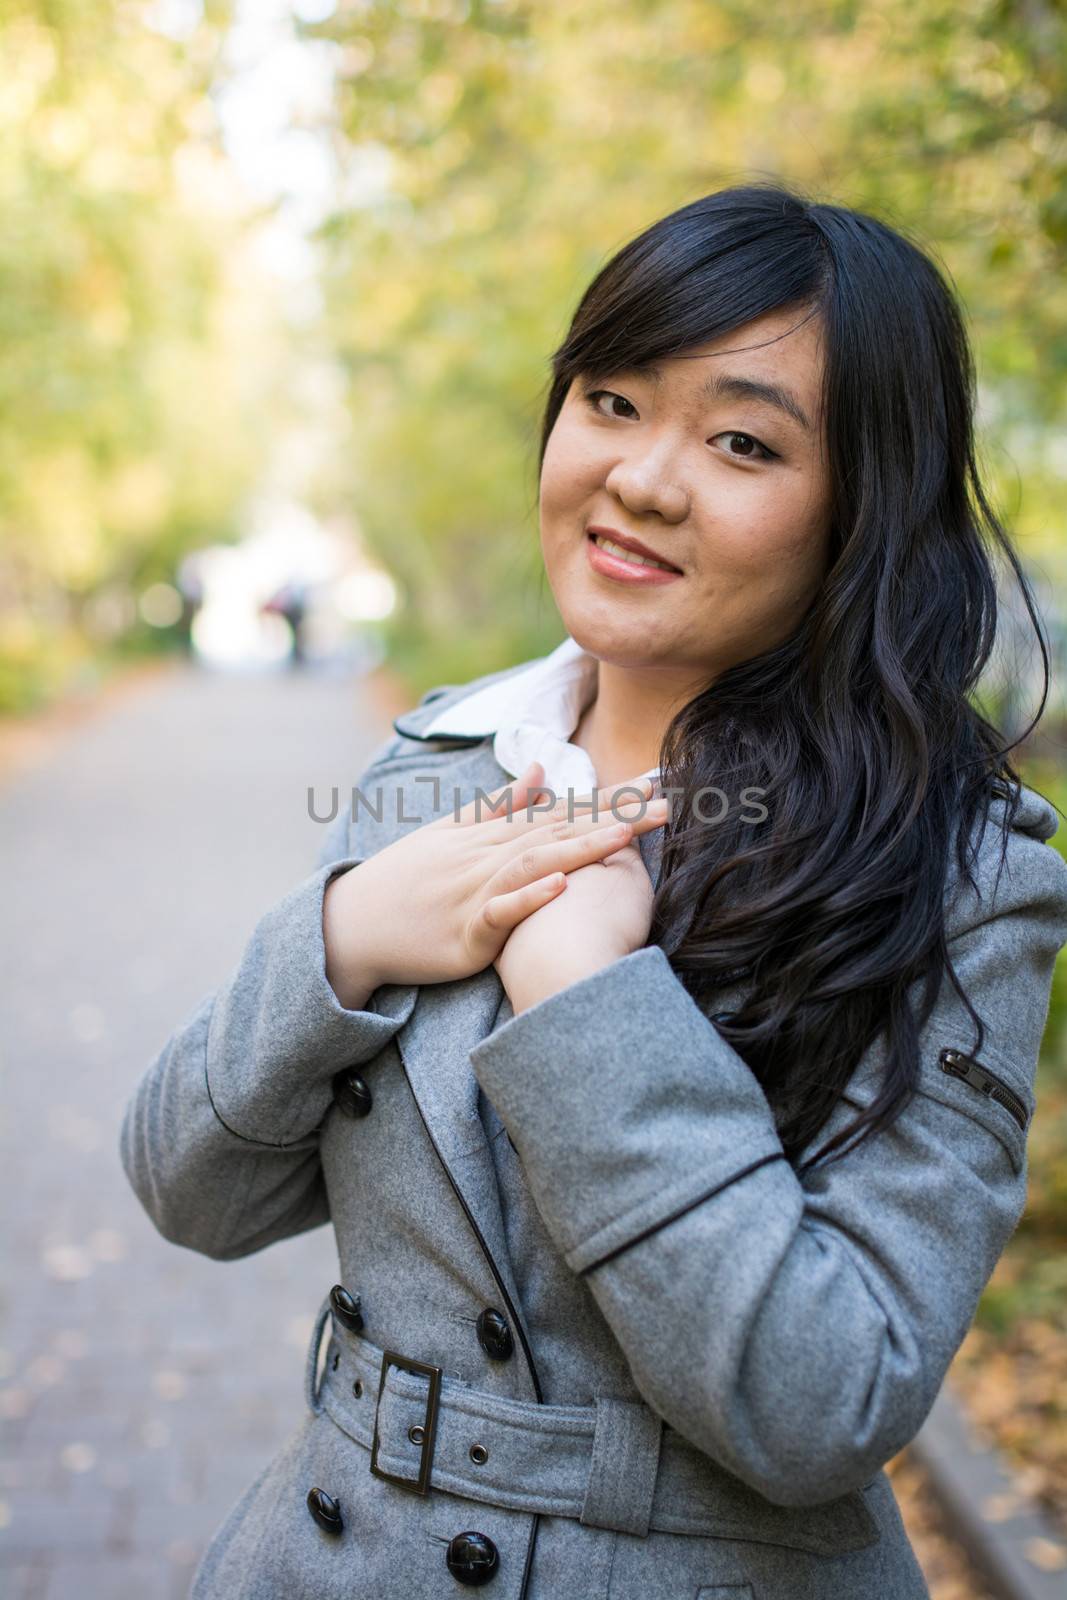 Portrait of beautiful young girl standing on a walk way bonded by trees looking hopeful